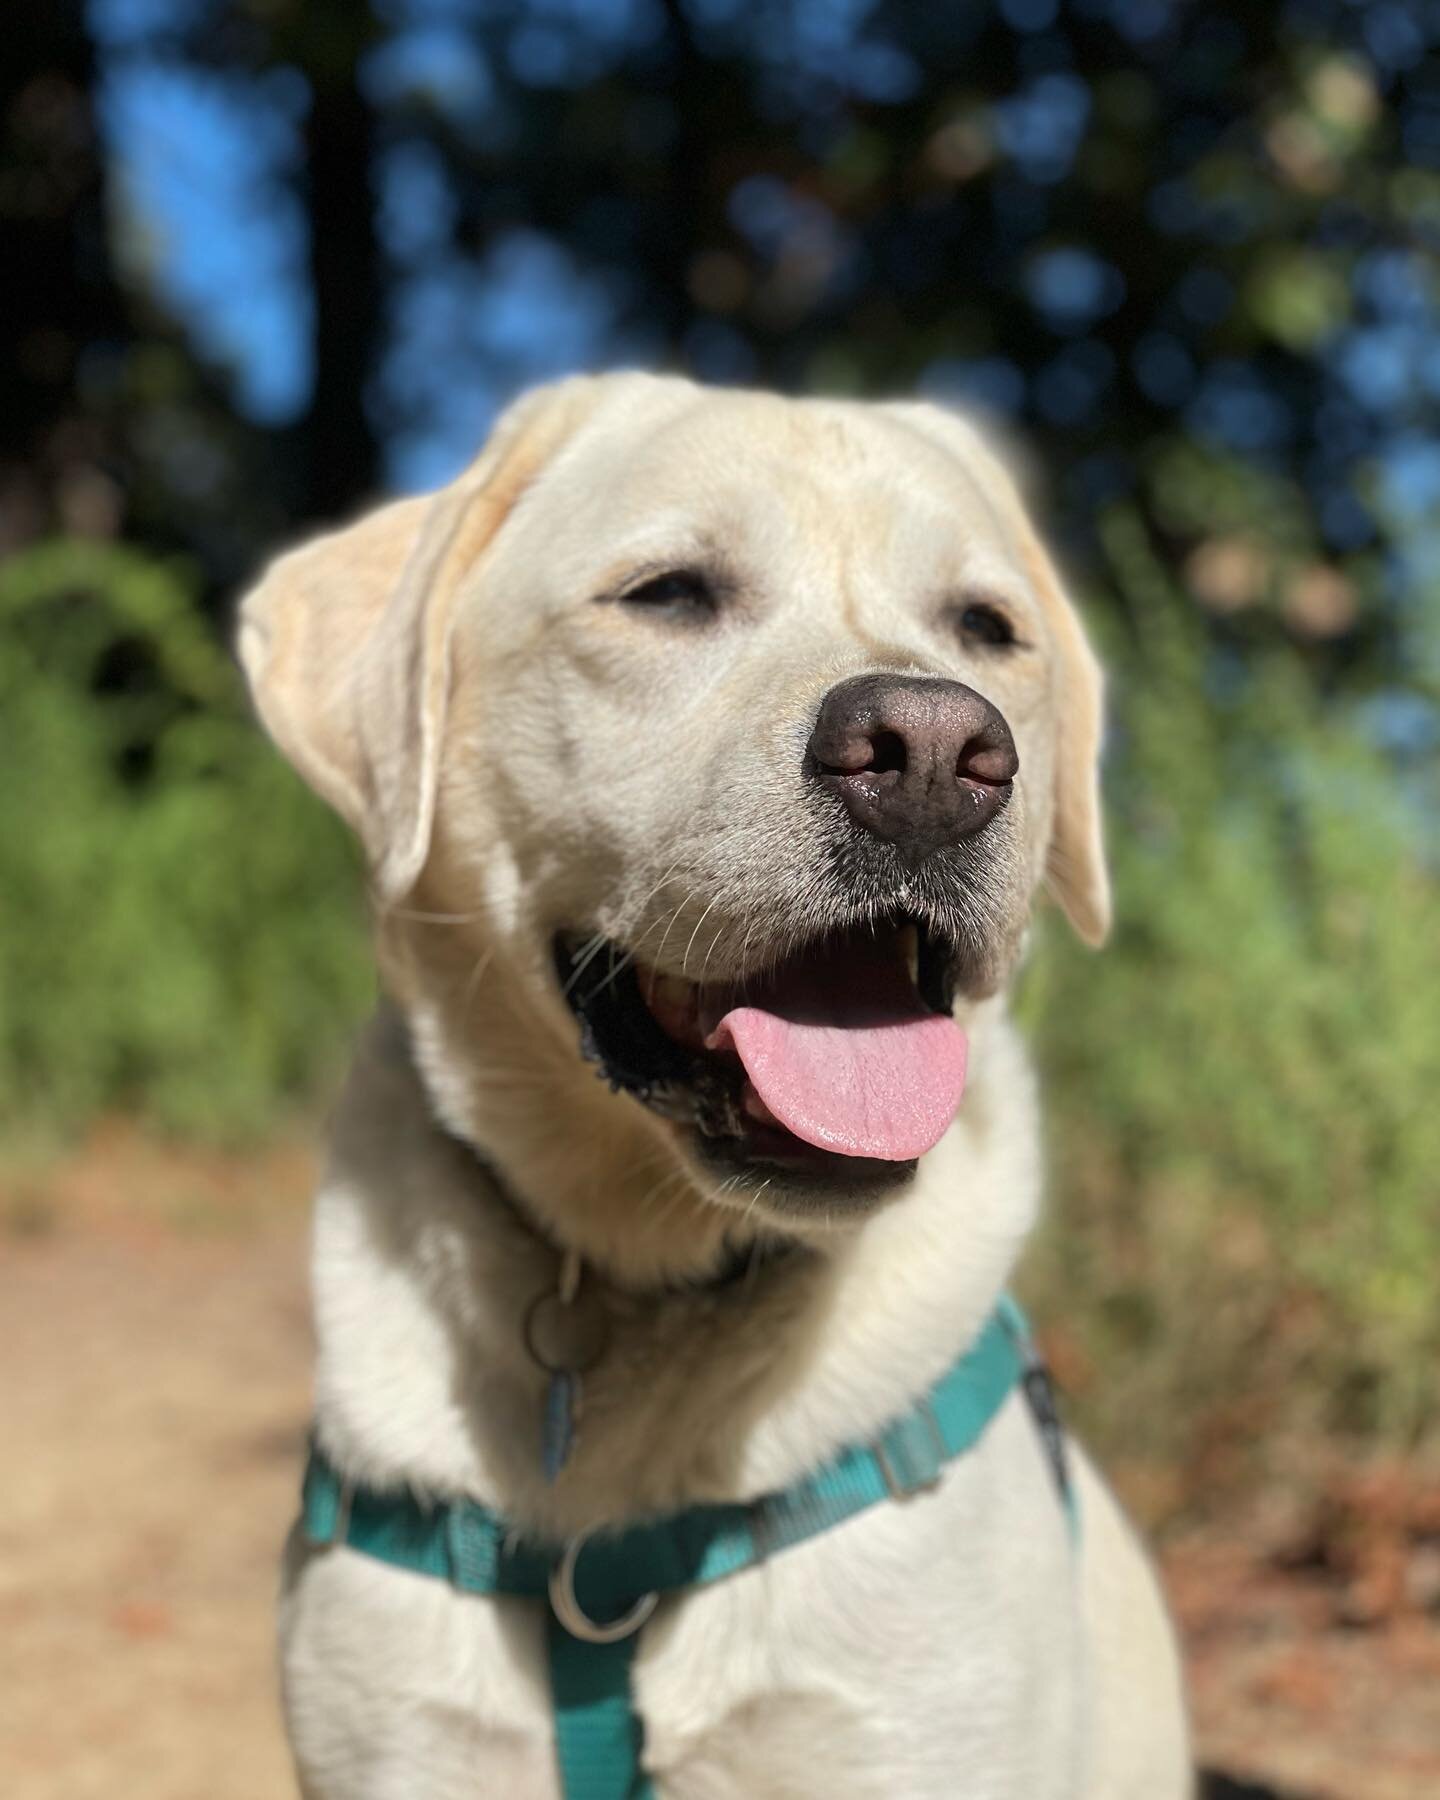 I have not posted pics of this cutie in awhile. Kona rocks! #marincanineadventures #doglife #happydog #dogsofinsta #dogsofinstagram #dogohotography #marindogs #traildogs #hikewithdogs #outdoordogs #labrador #labradorretriever #labradorretrieversofins